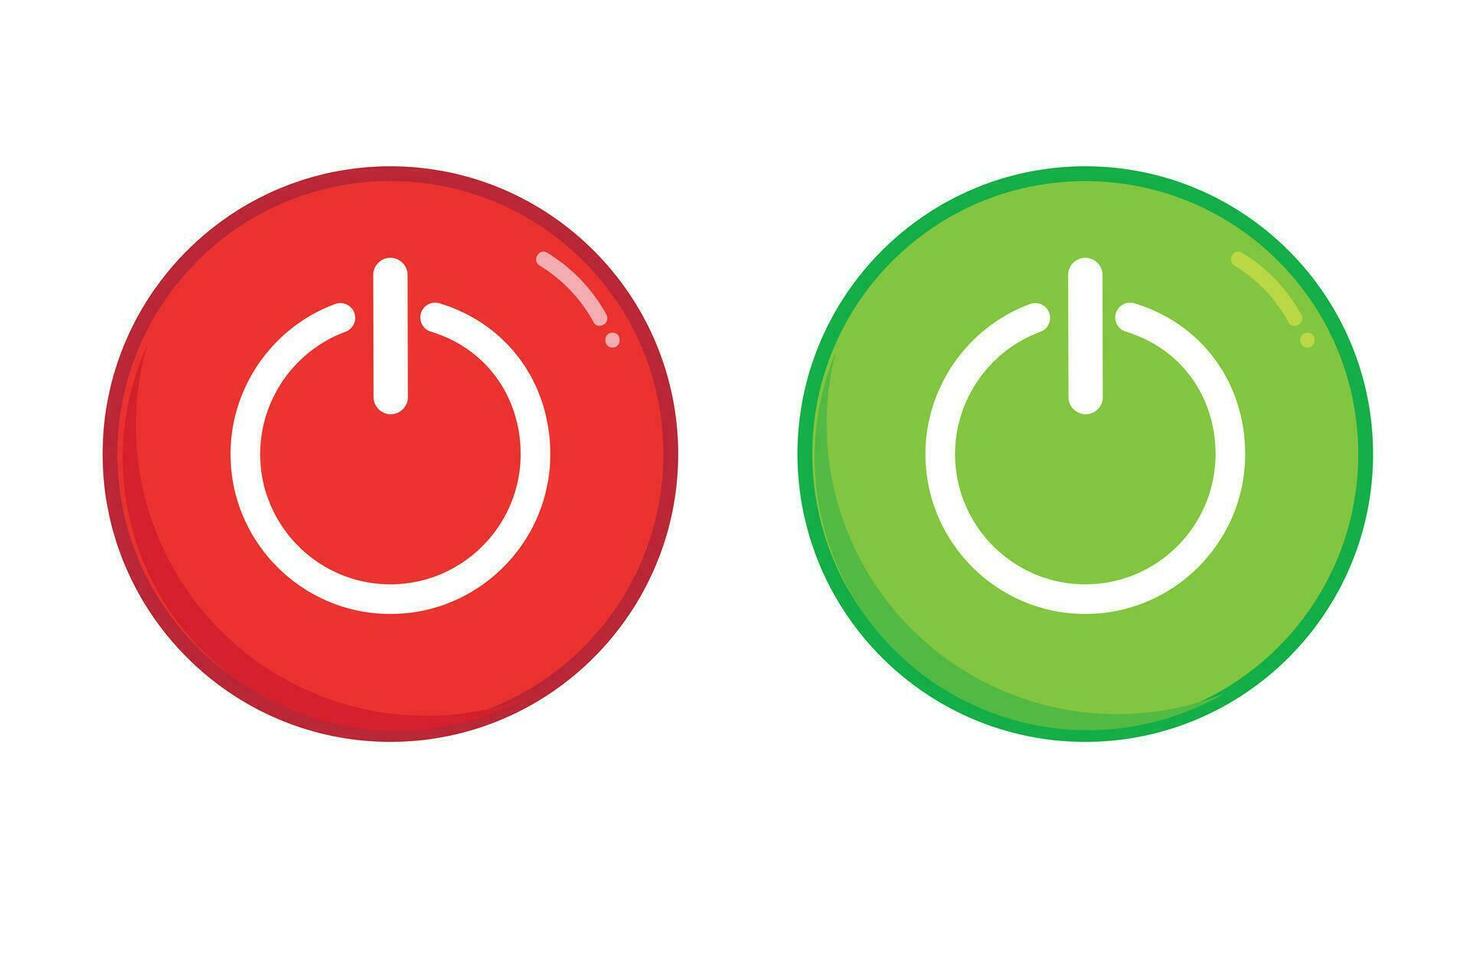 Power button. Power icon button with turn on and off buttons with shut down switch power icons in round circle buttons in red and green colors. Vector illustration